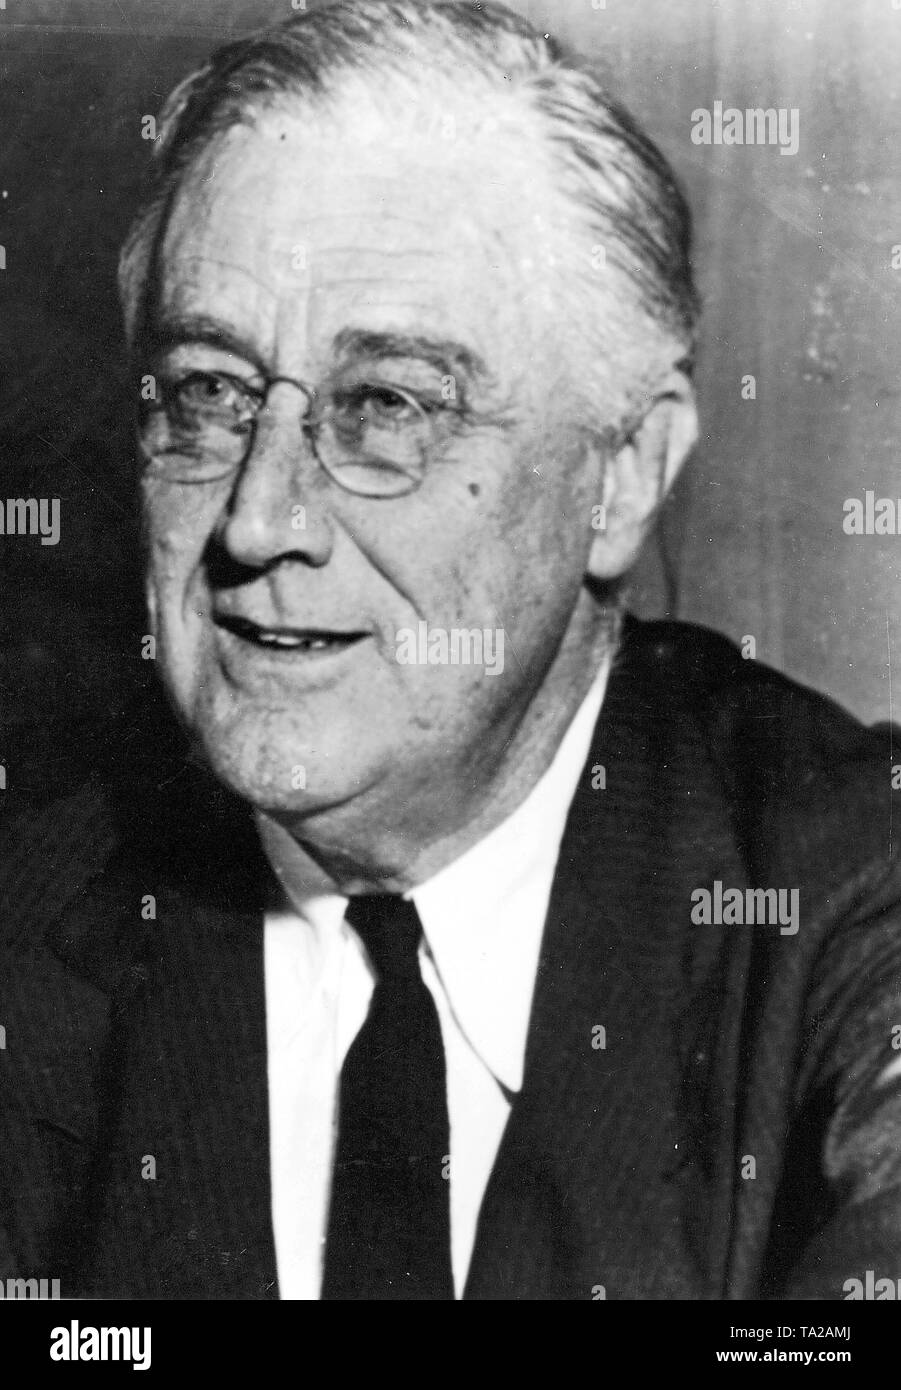 Franklin D. Roosevelt, the 32nd President of the United States of America and co-founder of the UN. Stock Photo